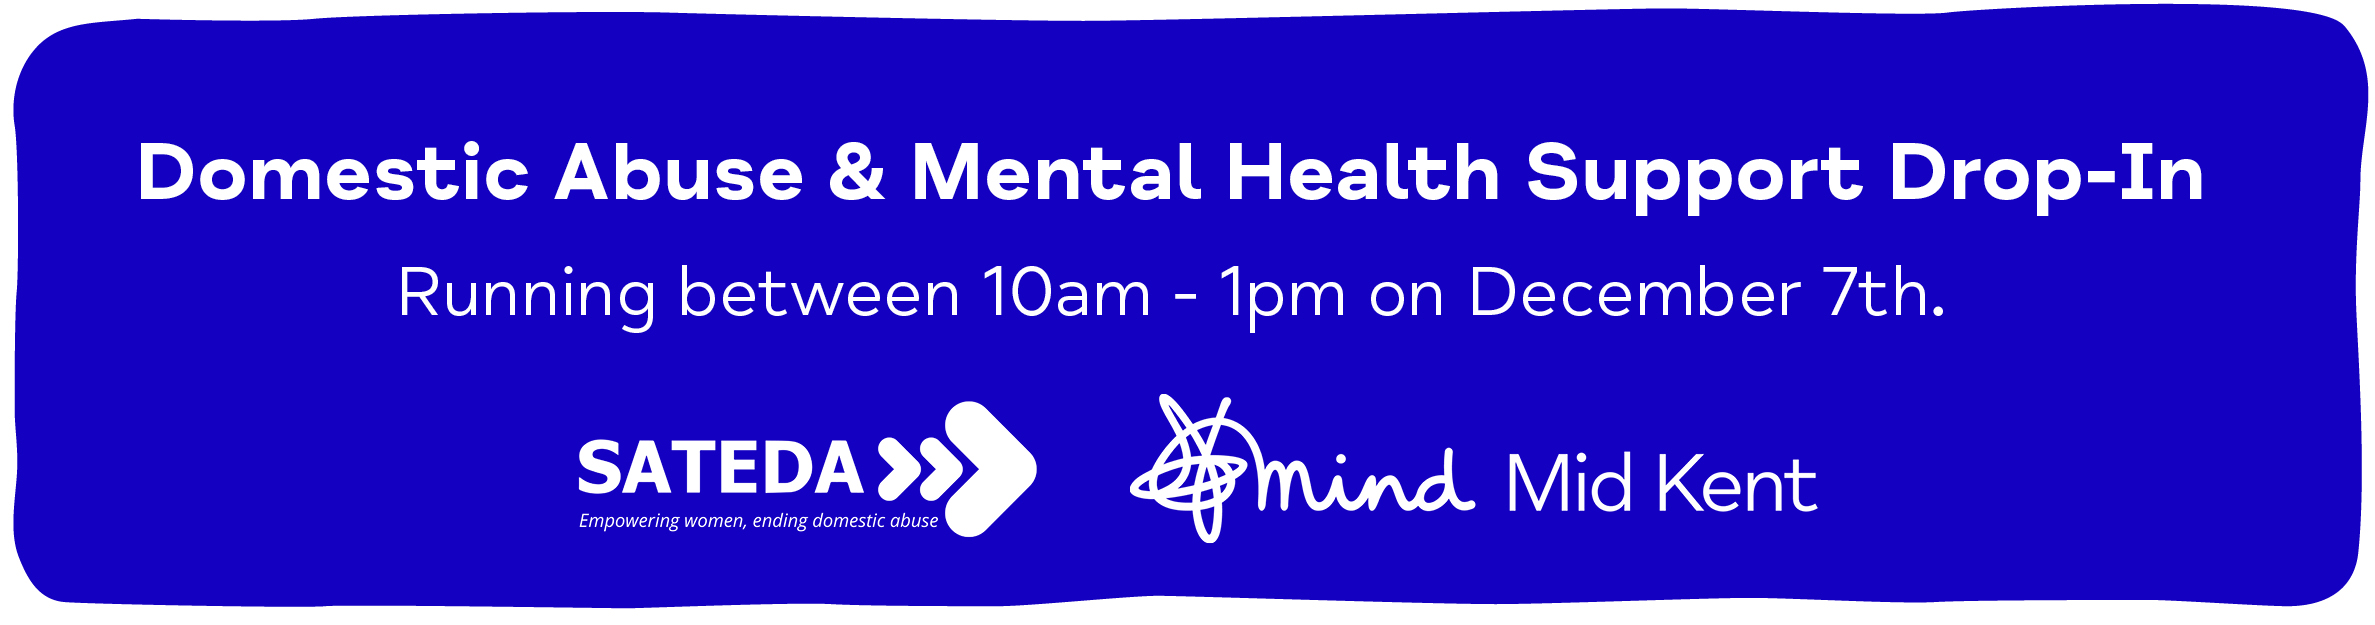 Domestic Abuse & Mental Health Support Drop-In. Running between 10am - 1pm on December 7th. Sateda & Mid Kent Mind.